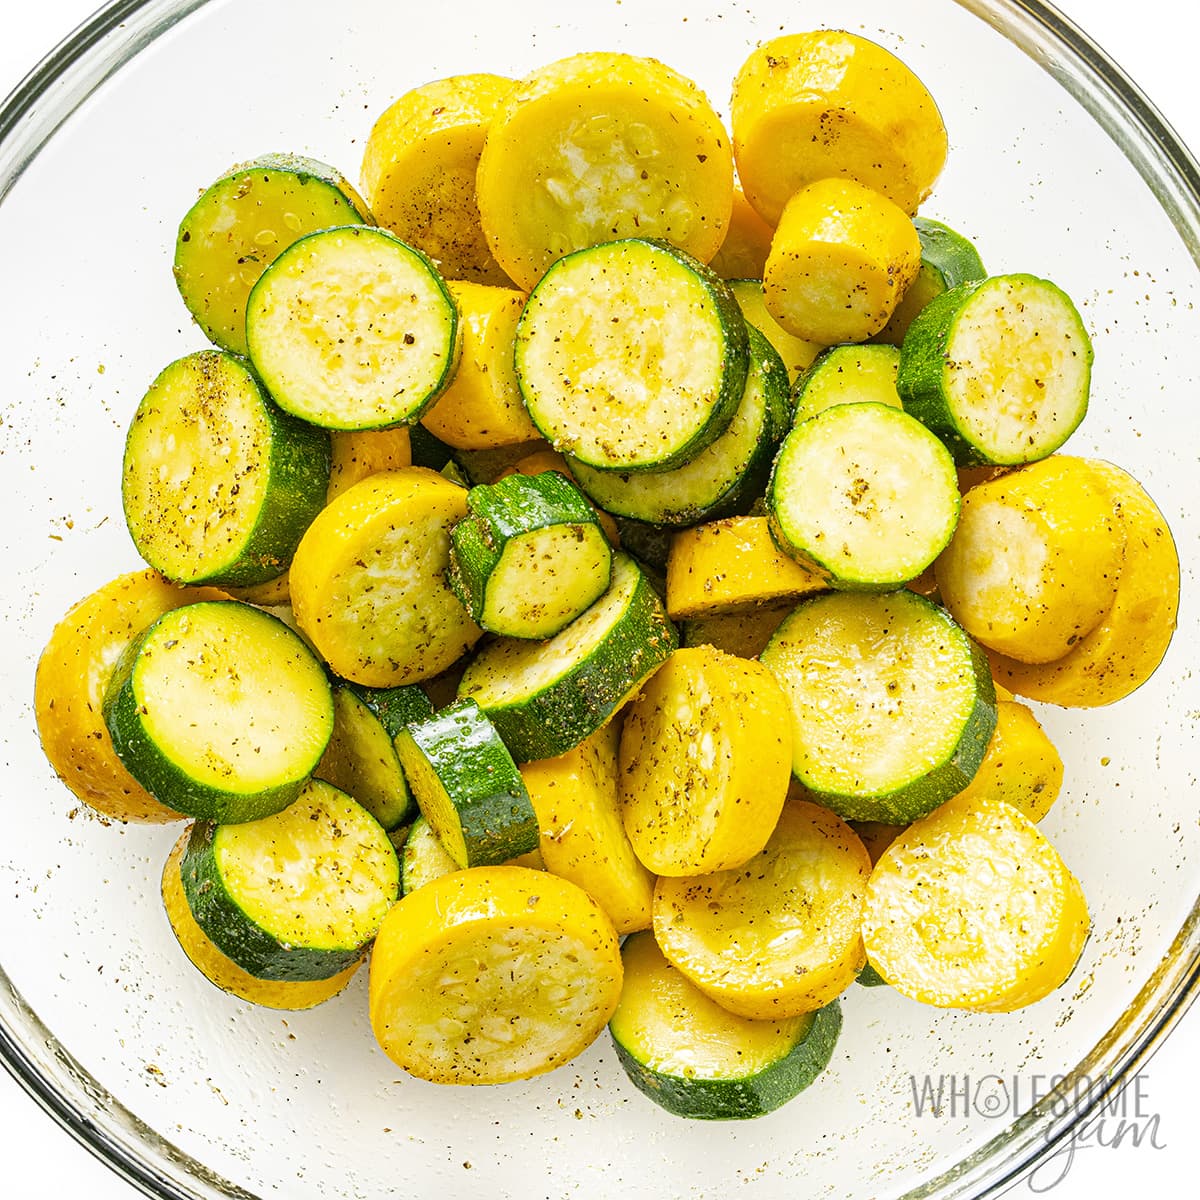 Veggies drizzled with olive oil and seasoned in a bowl.